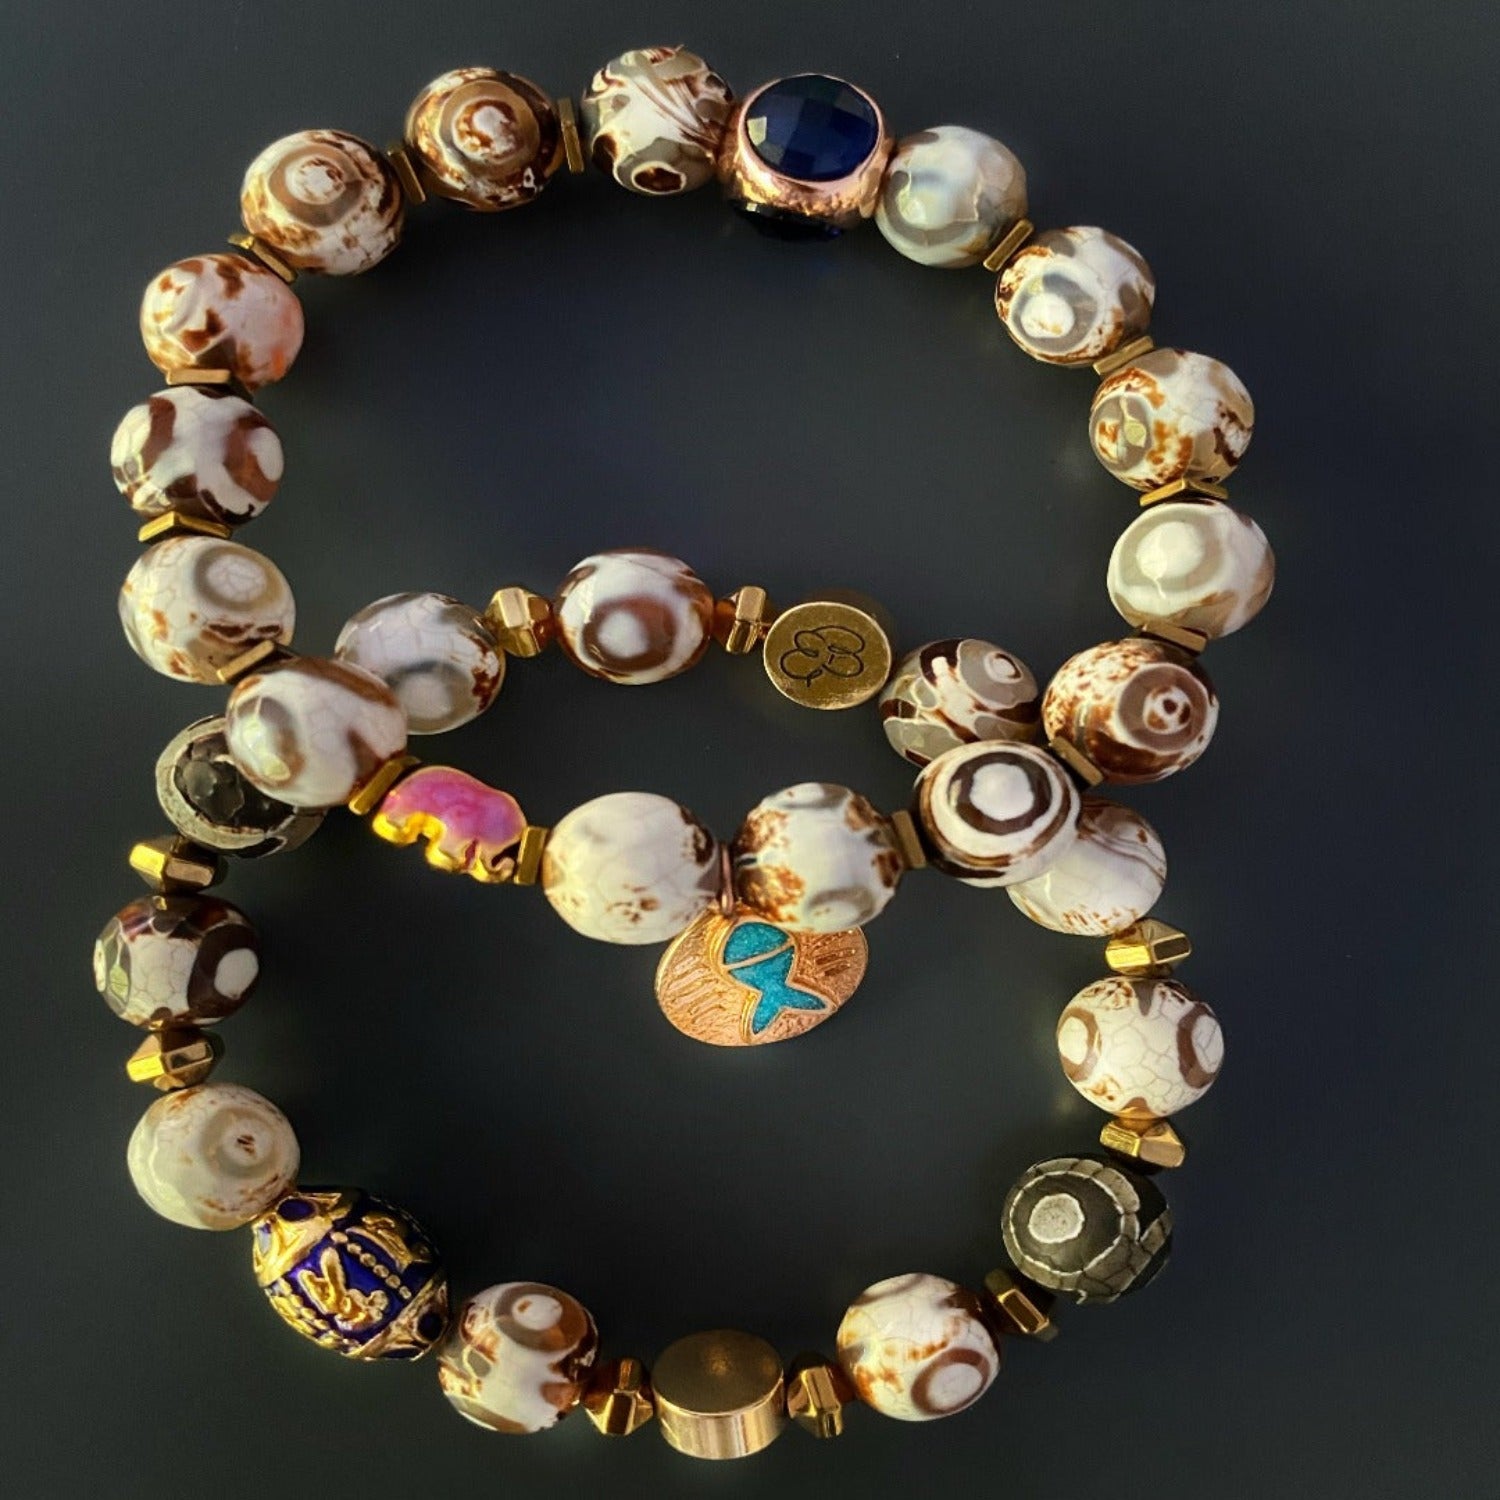 Experience the harmony and fortune of the Lucky Fish Bracelet Set, featuring Tibetan agate beads, gold hematite, and charms symbolizing good luck and prosperity.